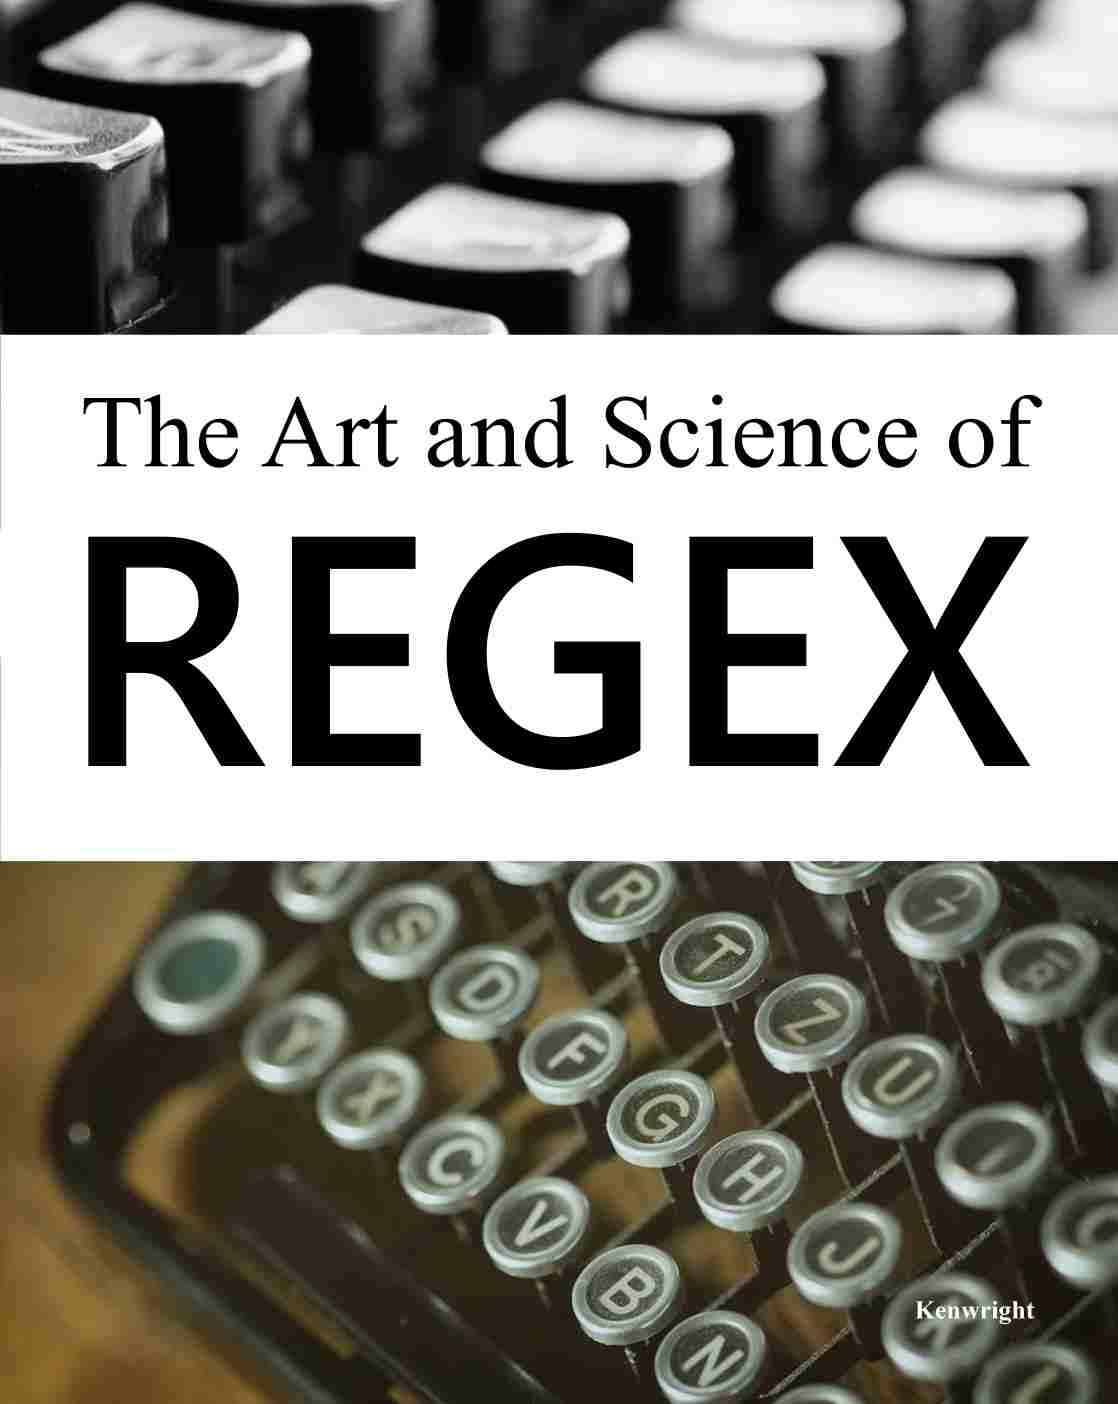 regular expressions regex art and science